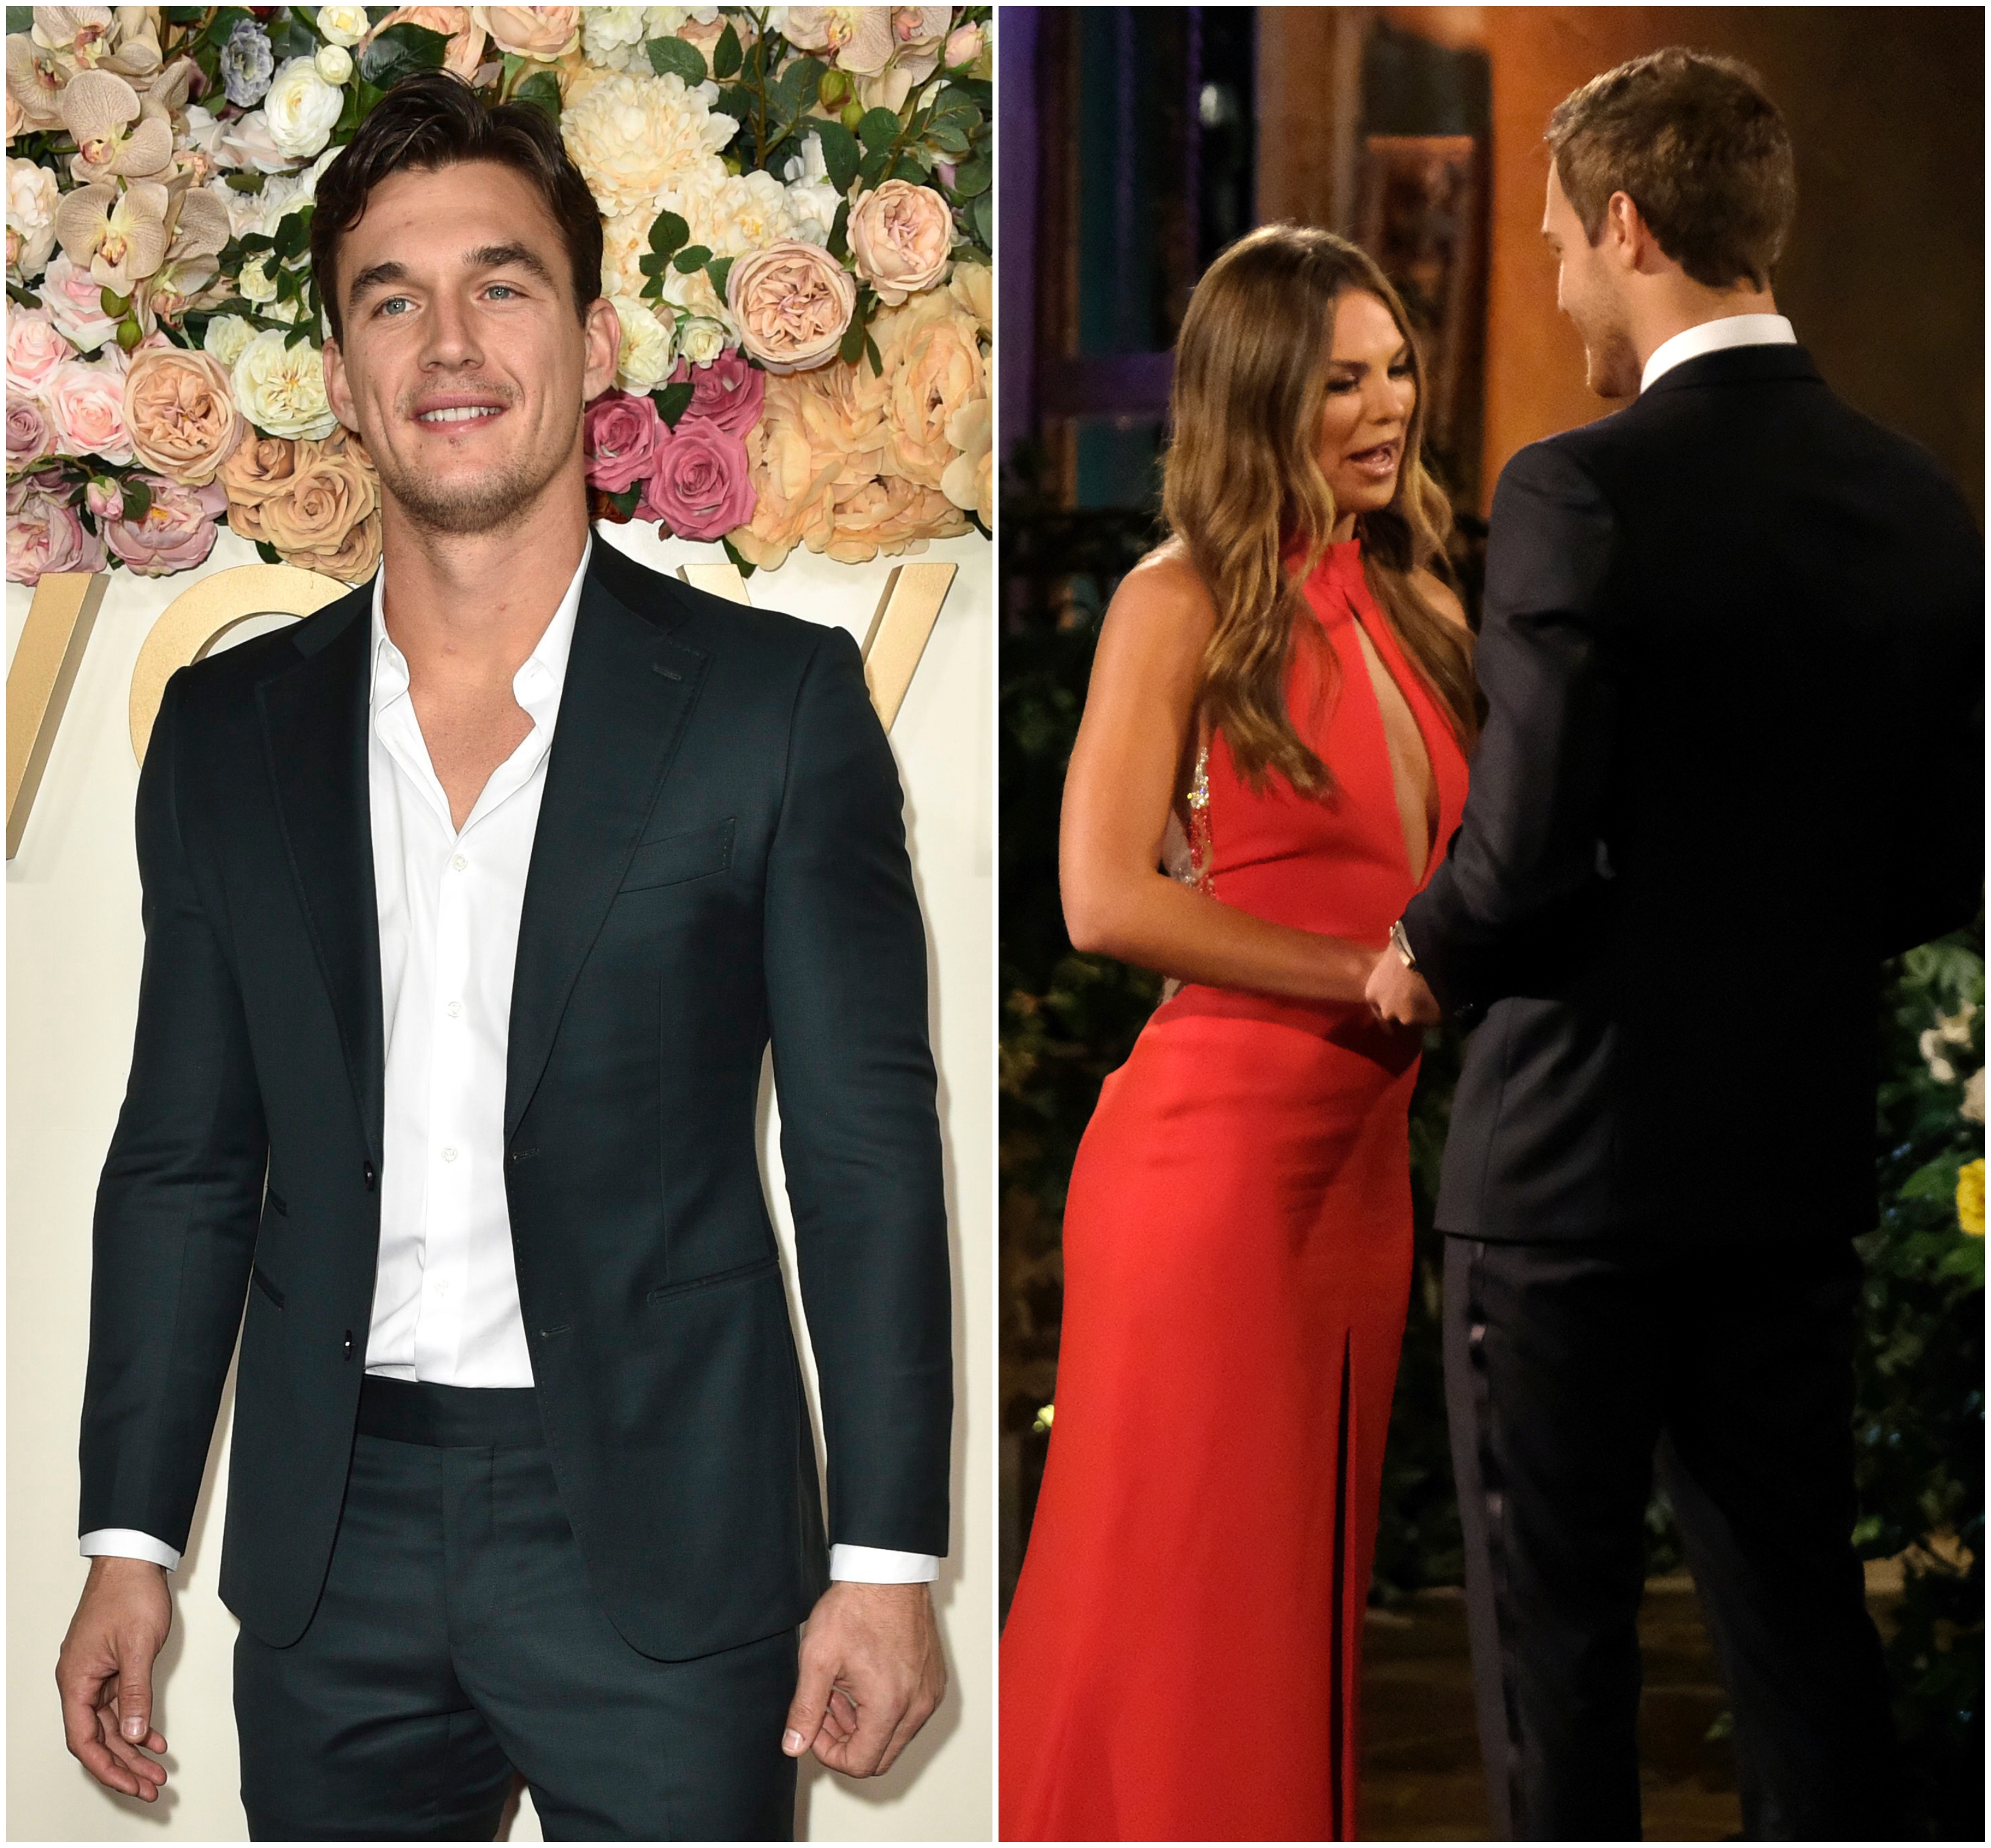 The Bachelor News, Articles, Stories & Trends for Today